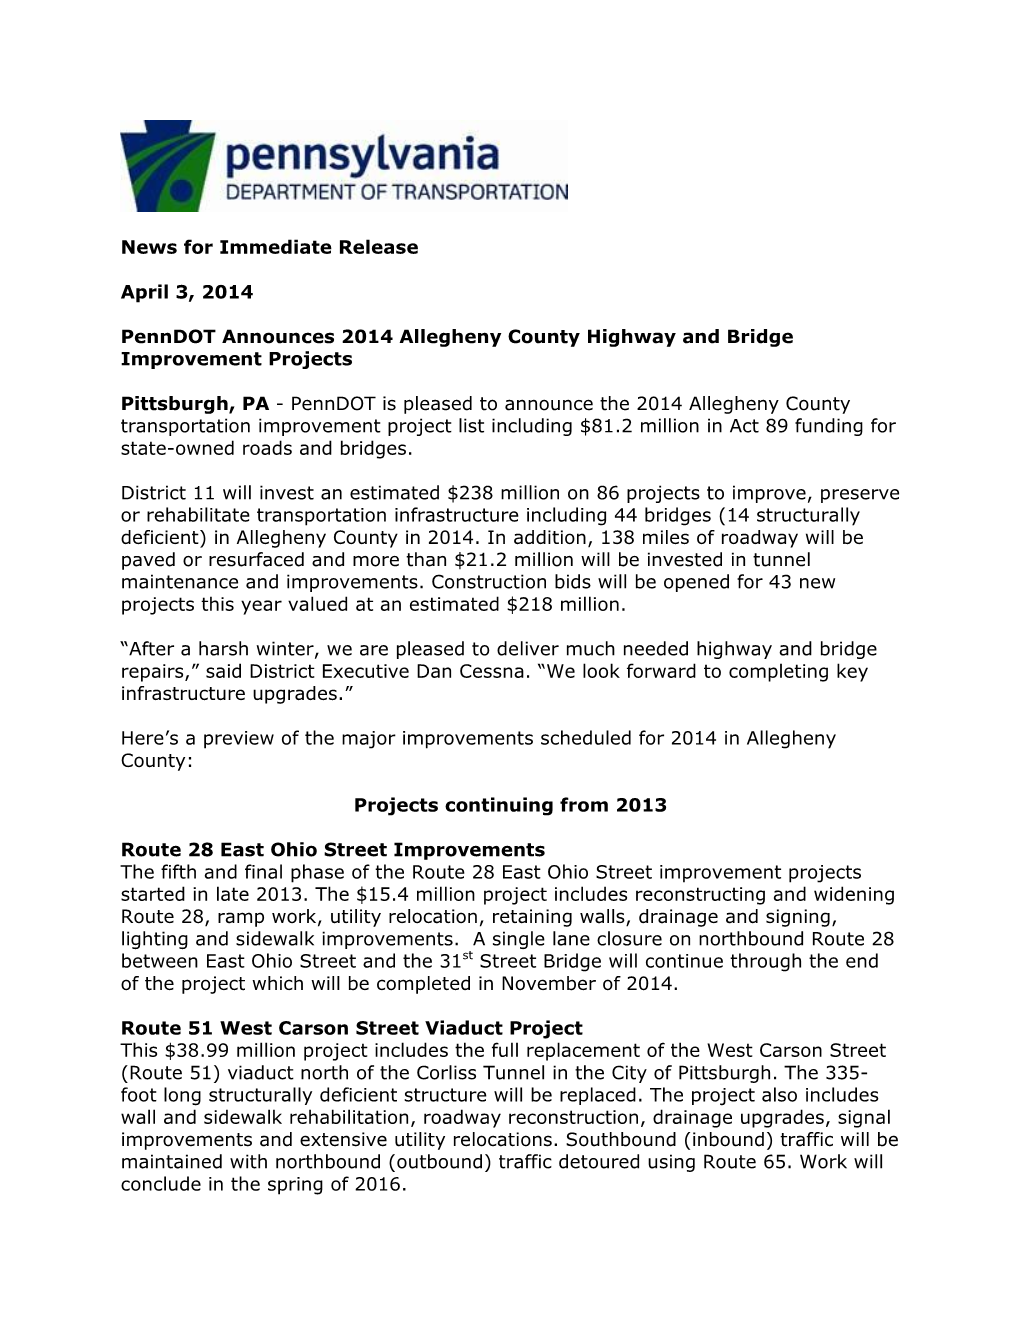 News for Immediate Release April 3, 2014 Penndot Announces 2014 Allegheny County Highway and Bridge Improvement Projects